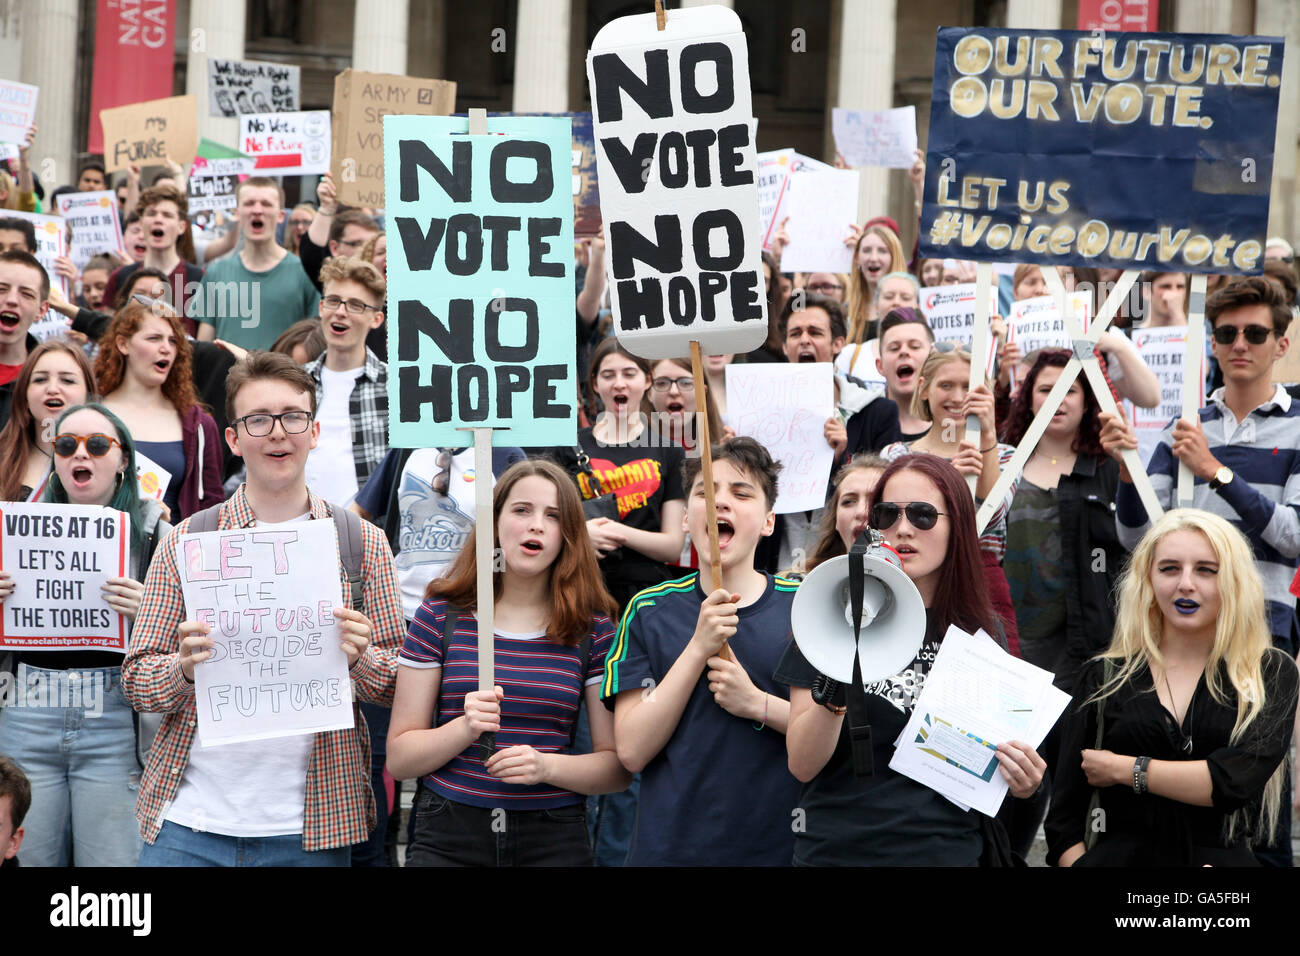 Trafalgar Square, London, UK. 3rd July, 2016. A group of protesters, mainly 16-17 year-olds, expressing their outrage at not being allowed to vote, particularly following the EU referendum, which will impact their future most and where a vote by their age group might have altered the result, and Stock Photo